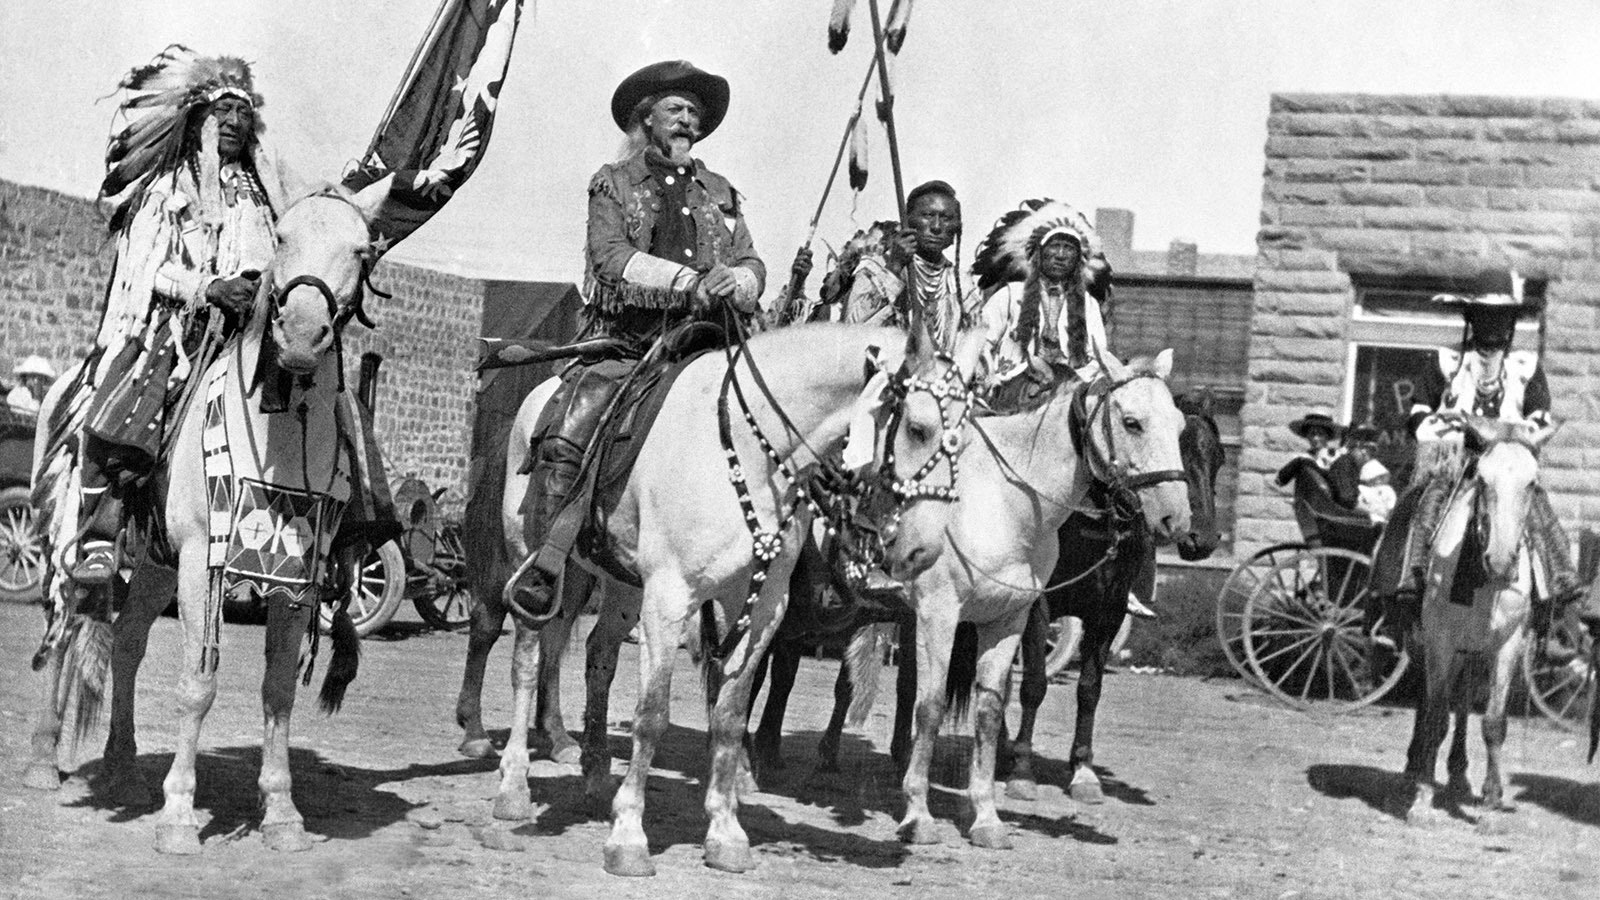 On horseback next to the First National Bank in Cody, Wyoming, in 1907 three years after a brazen bank robbery led to a shootout in the streets of Cody. Chief Iron Tail, left, was an Oglala Lakota chief who performed in Buffalo Bill Cody's Wild West Show. He's pictured here next to Cody. An unknown person is next to Buffalo Bill, and next to him is Chief Plenty Coups of the Crow Nation.